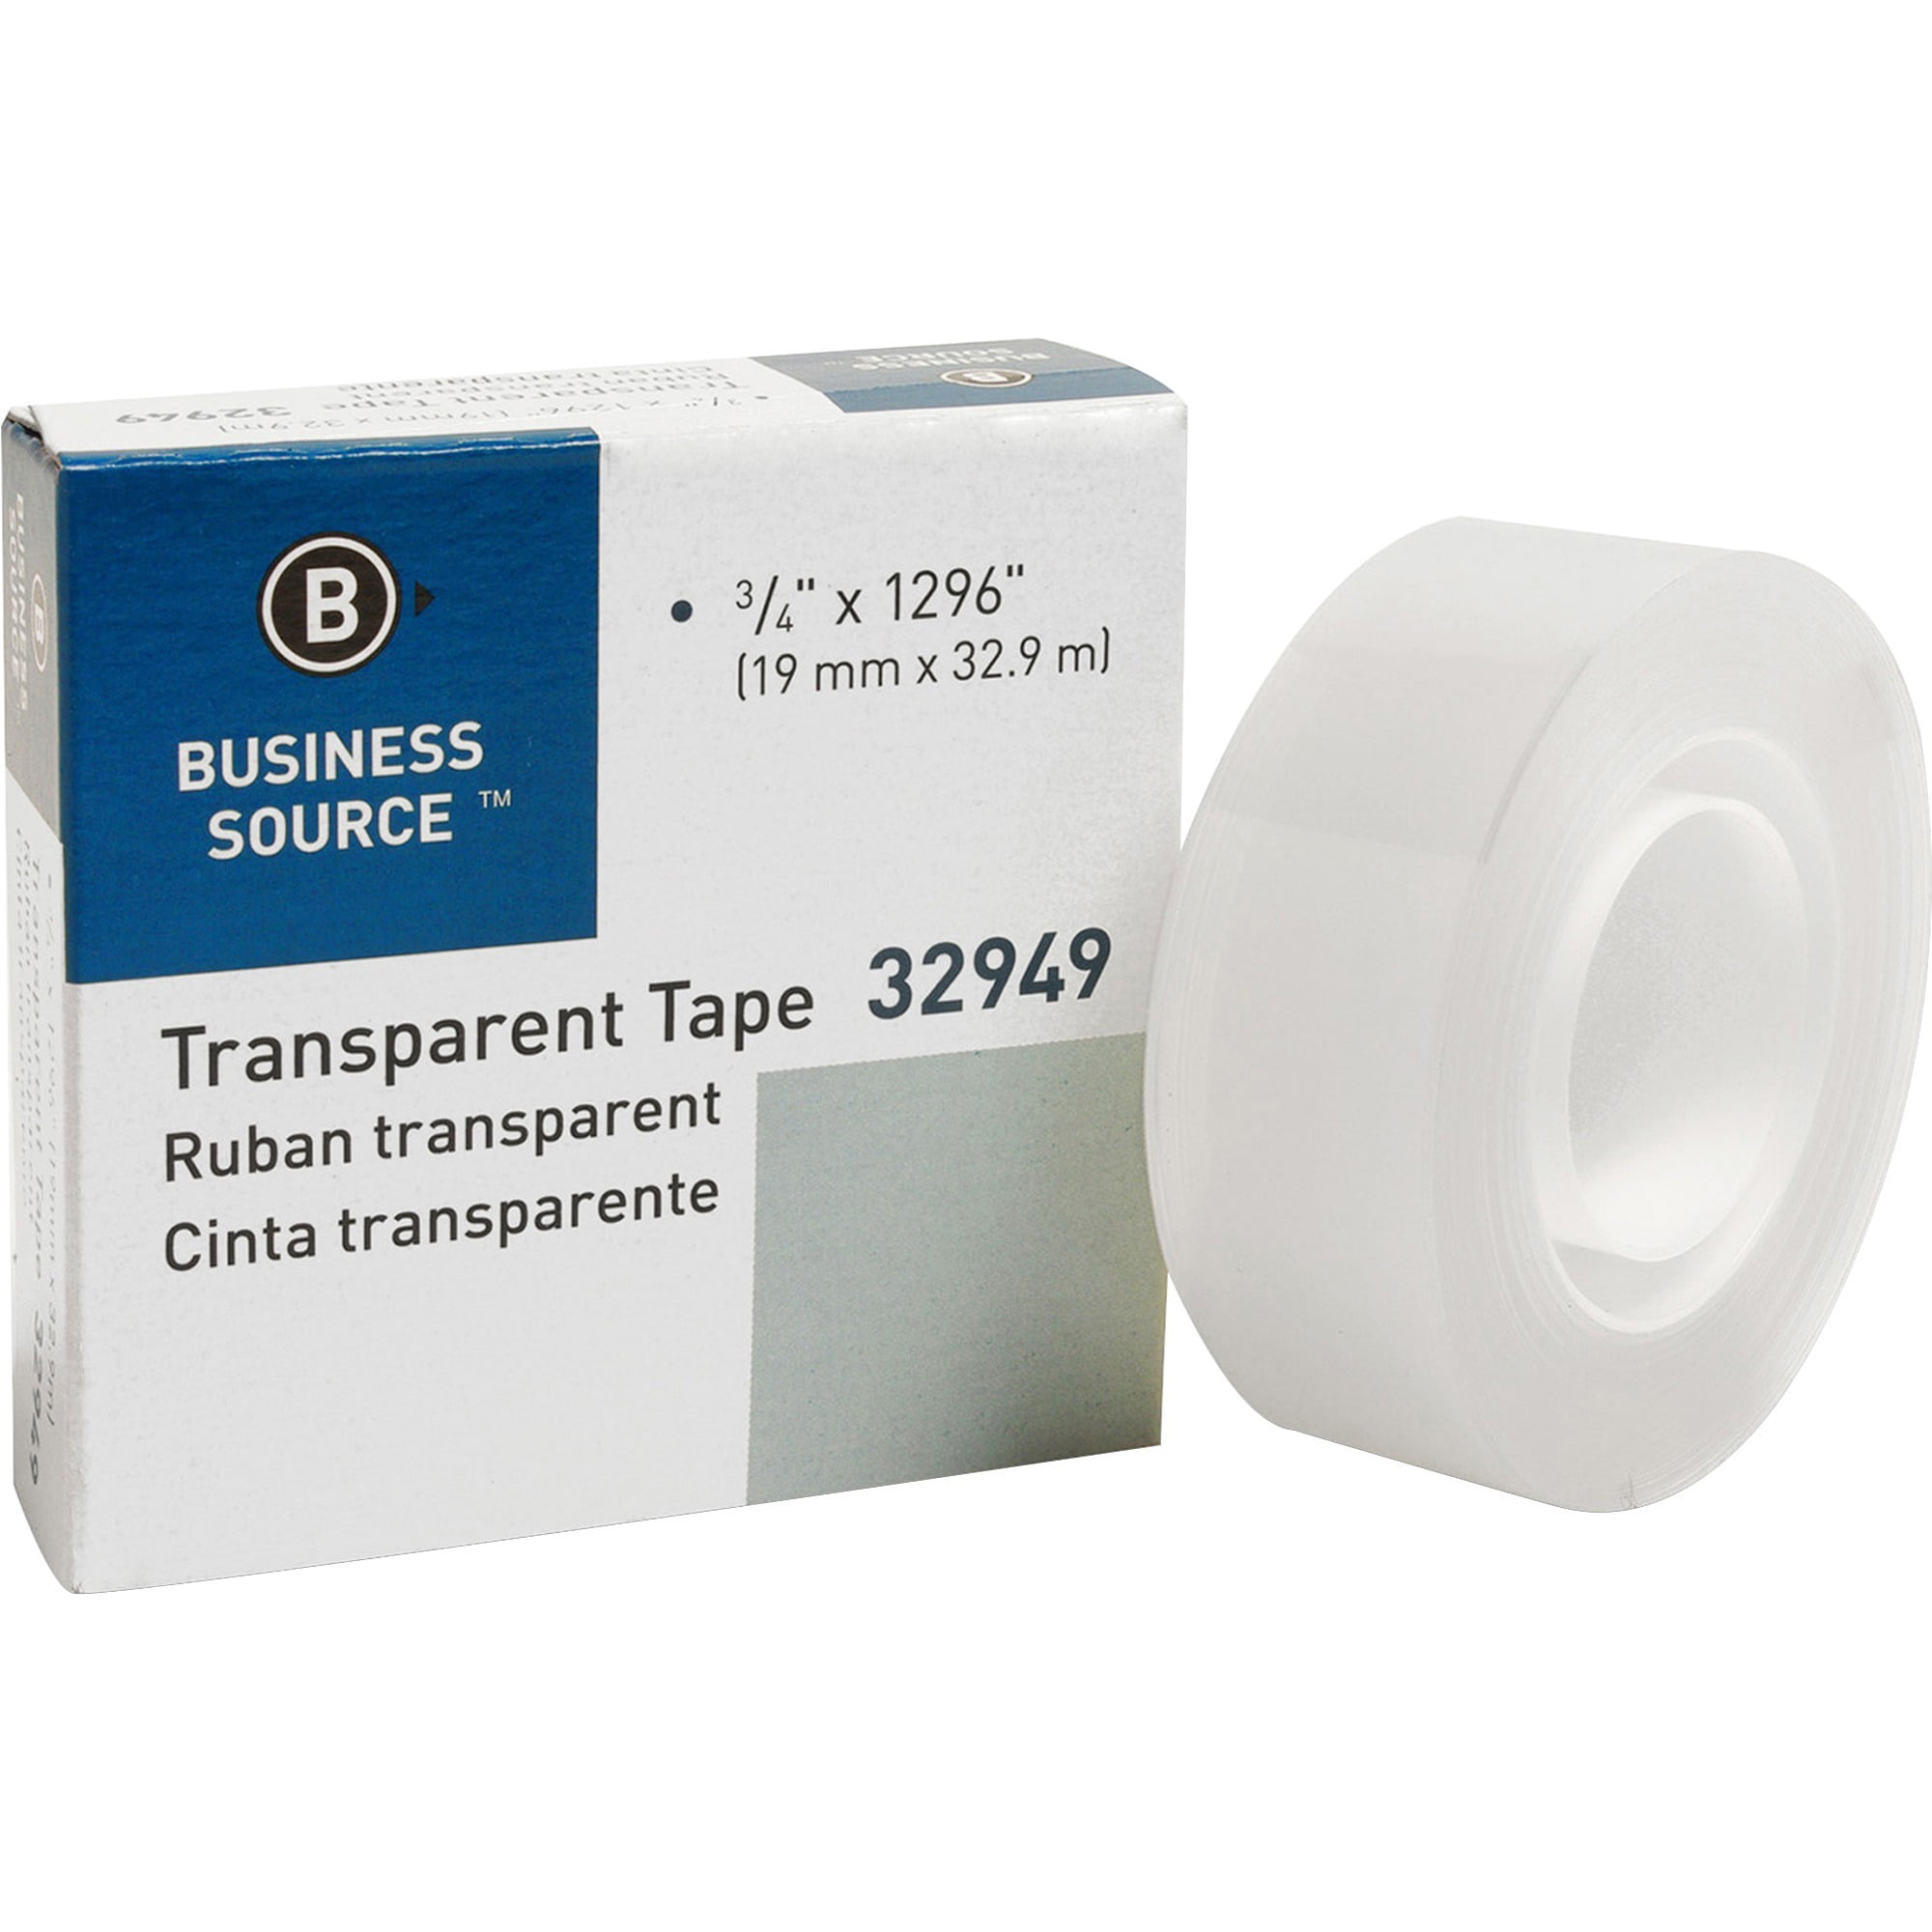 Highland 5910 Transparent Tape 0.50 Inch x 36 Yards Pack of 12 